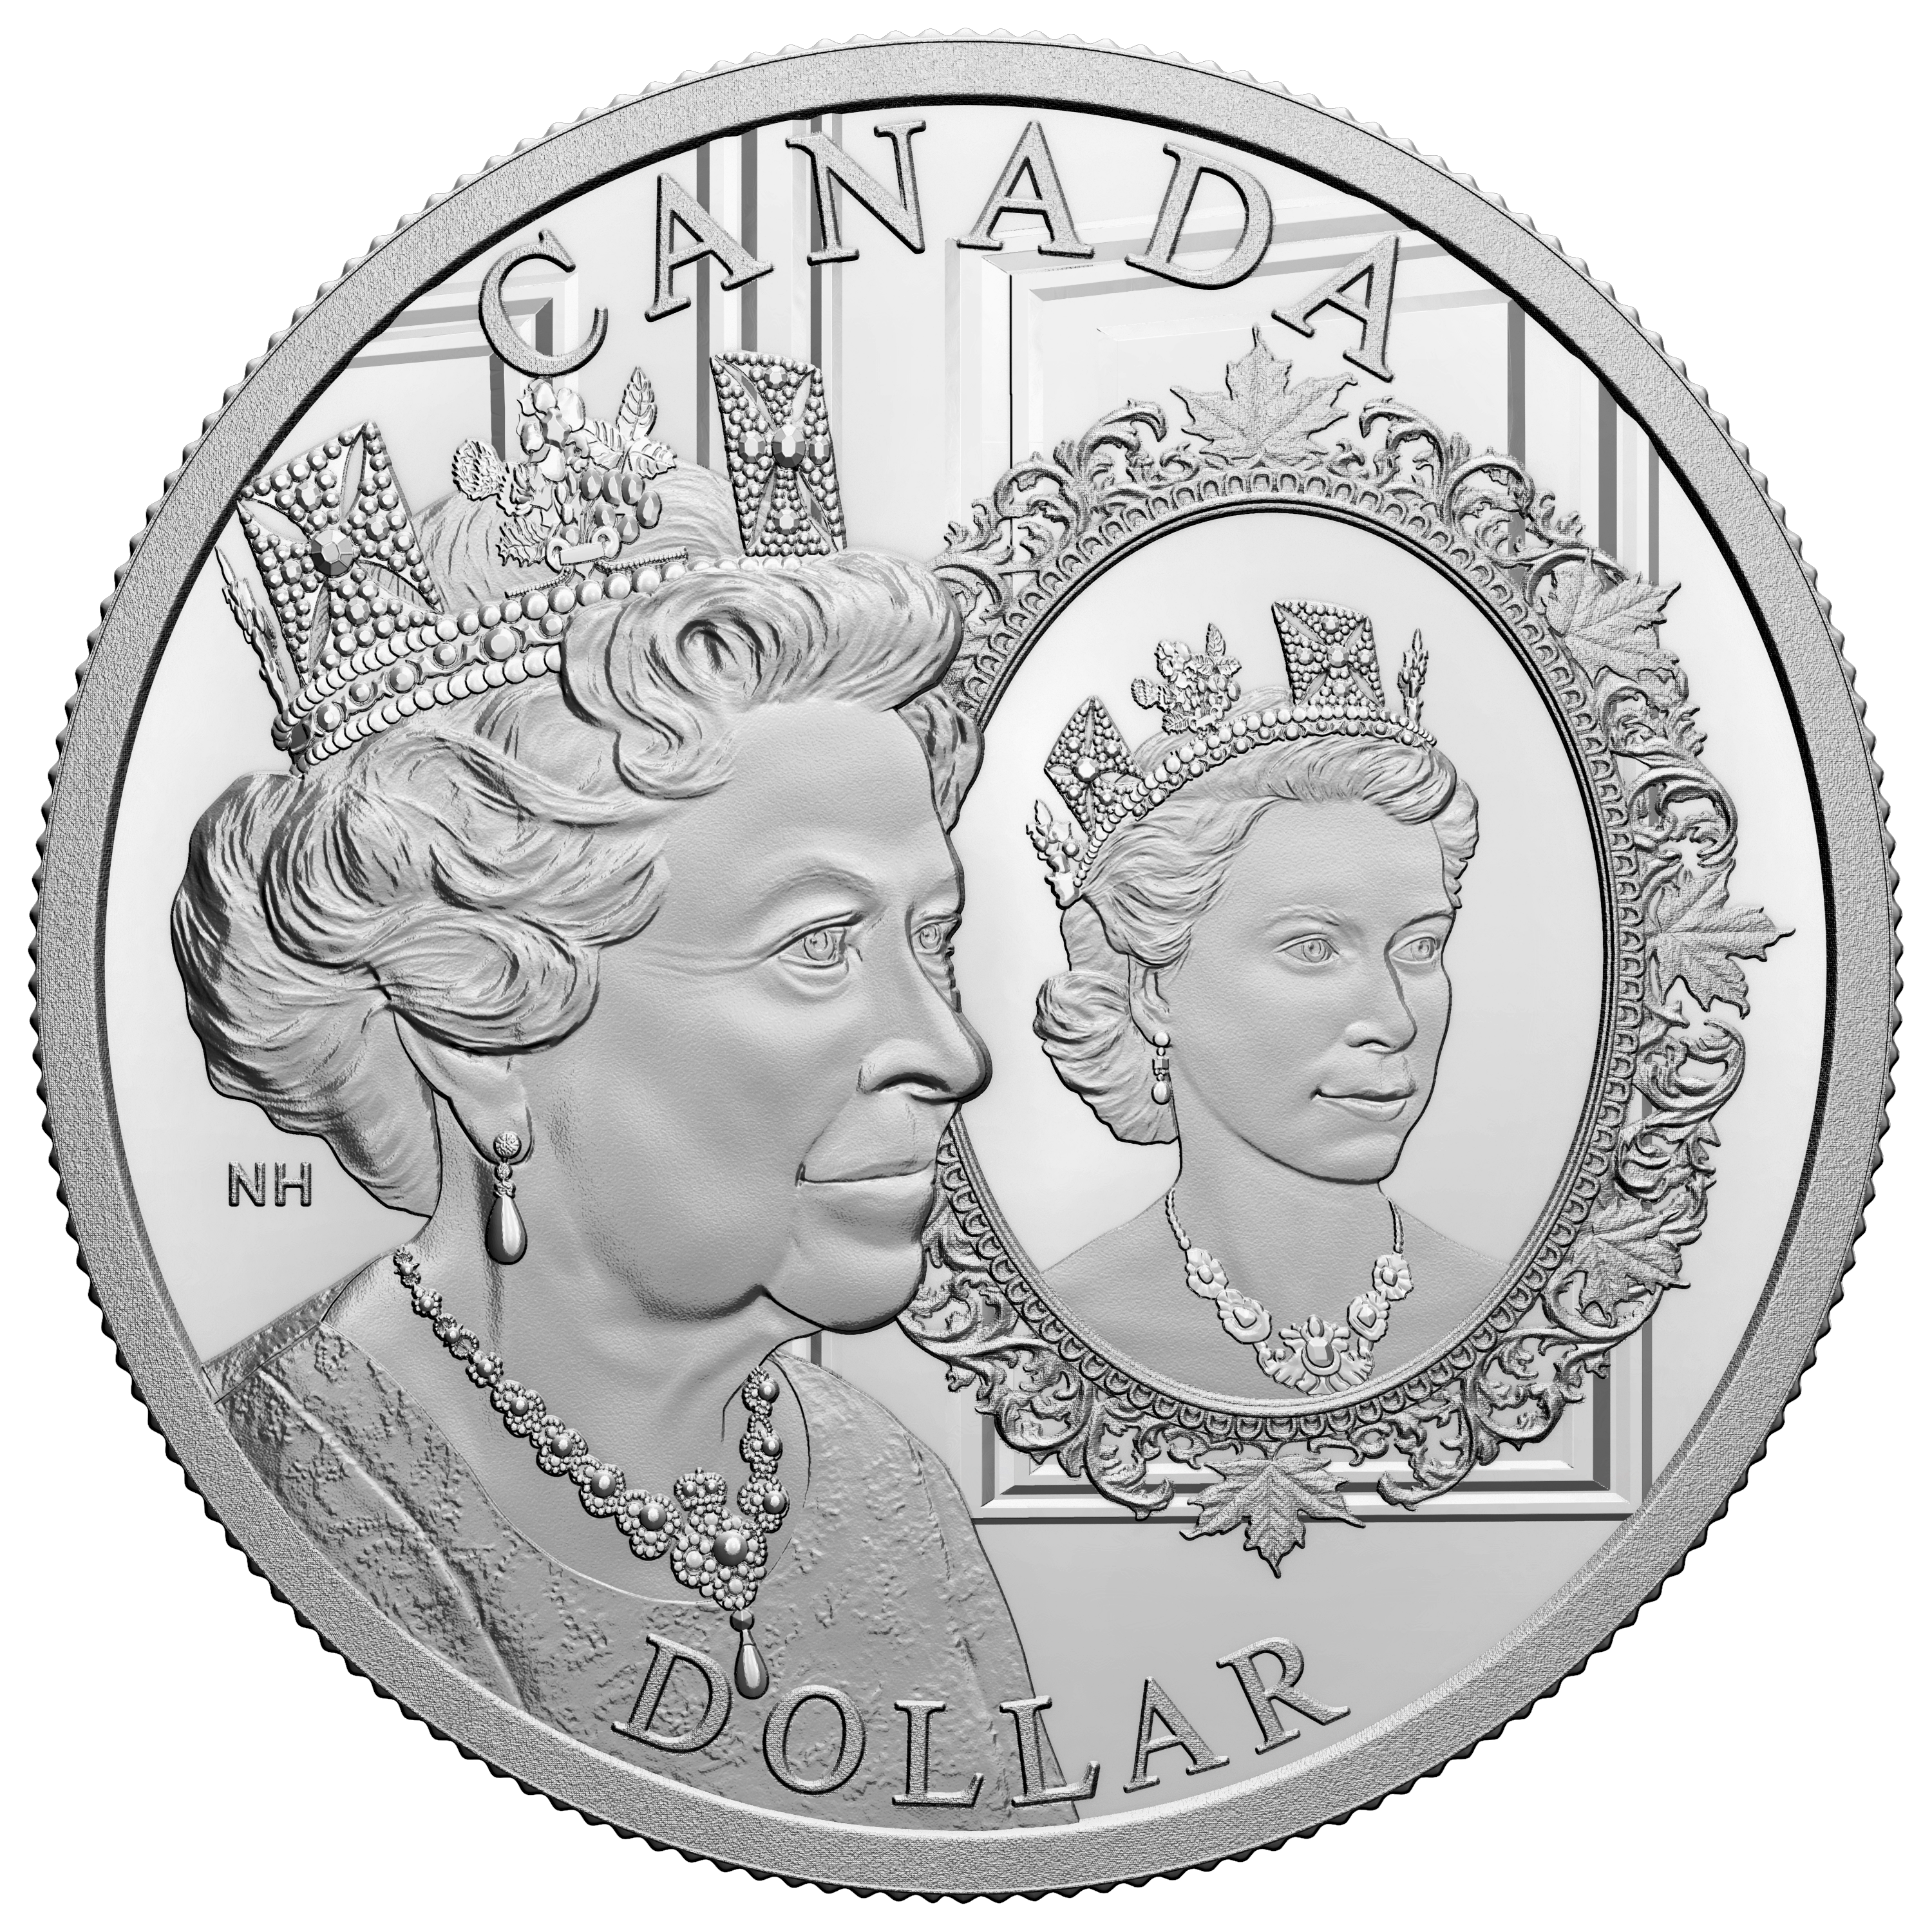 PLATINUM JUBILEE OF HER MAJESTY QUEEN ELIZABETH II Special Edition Silver Coin $1 Canada 2022